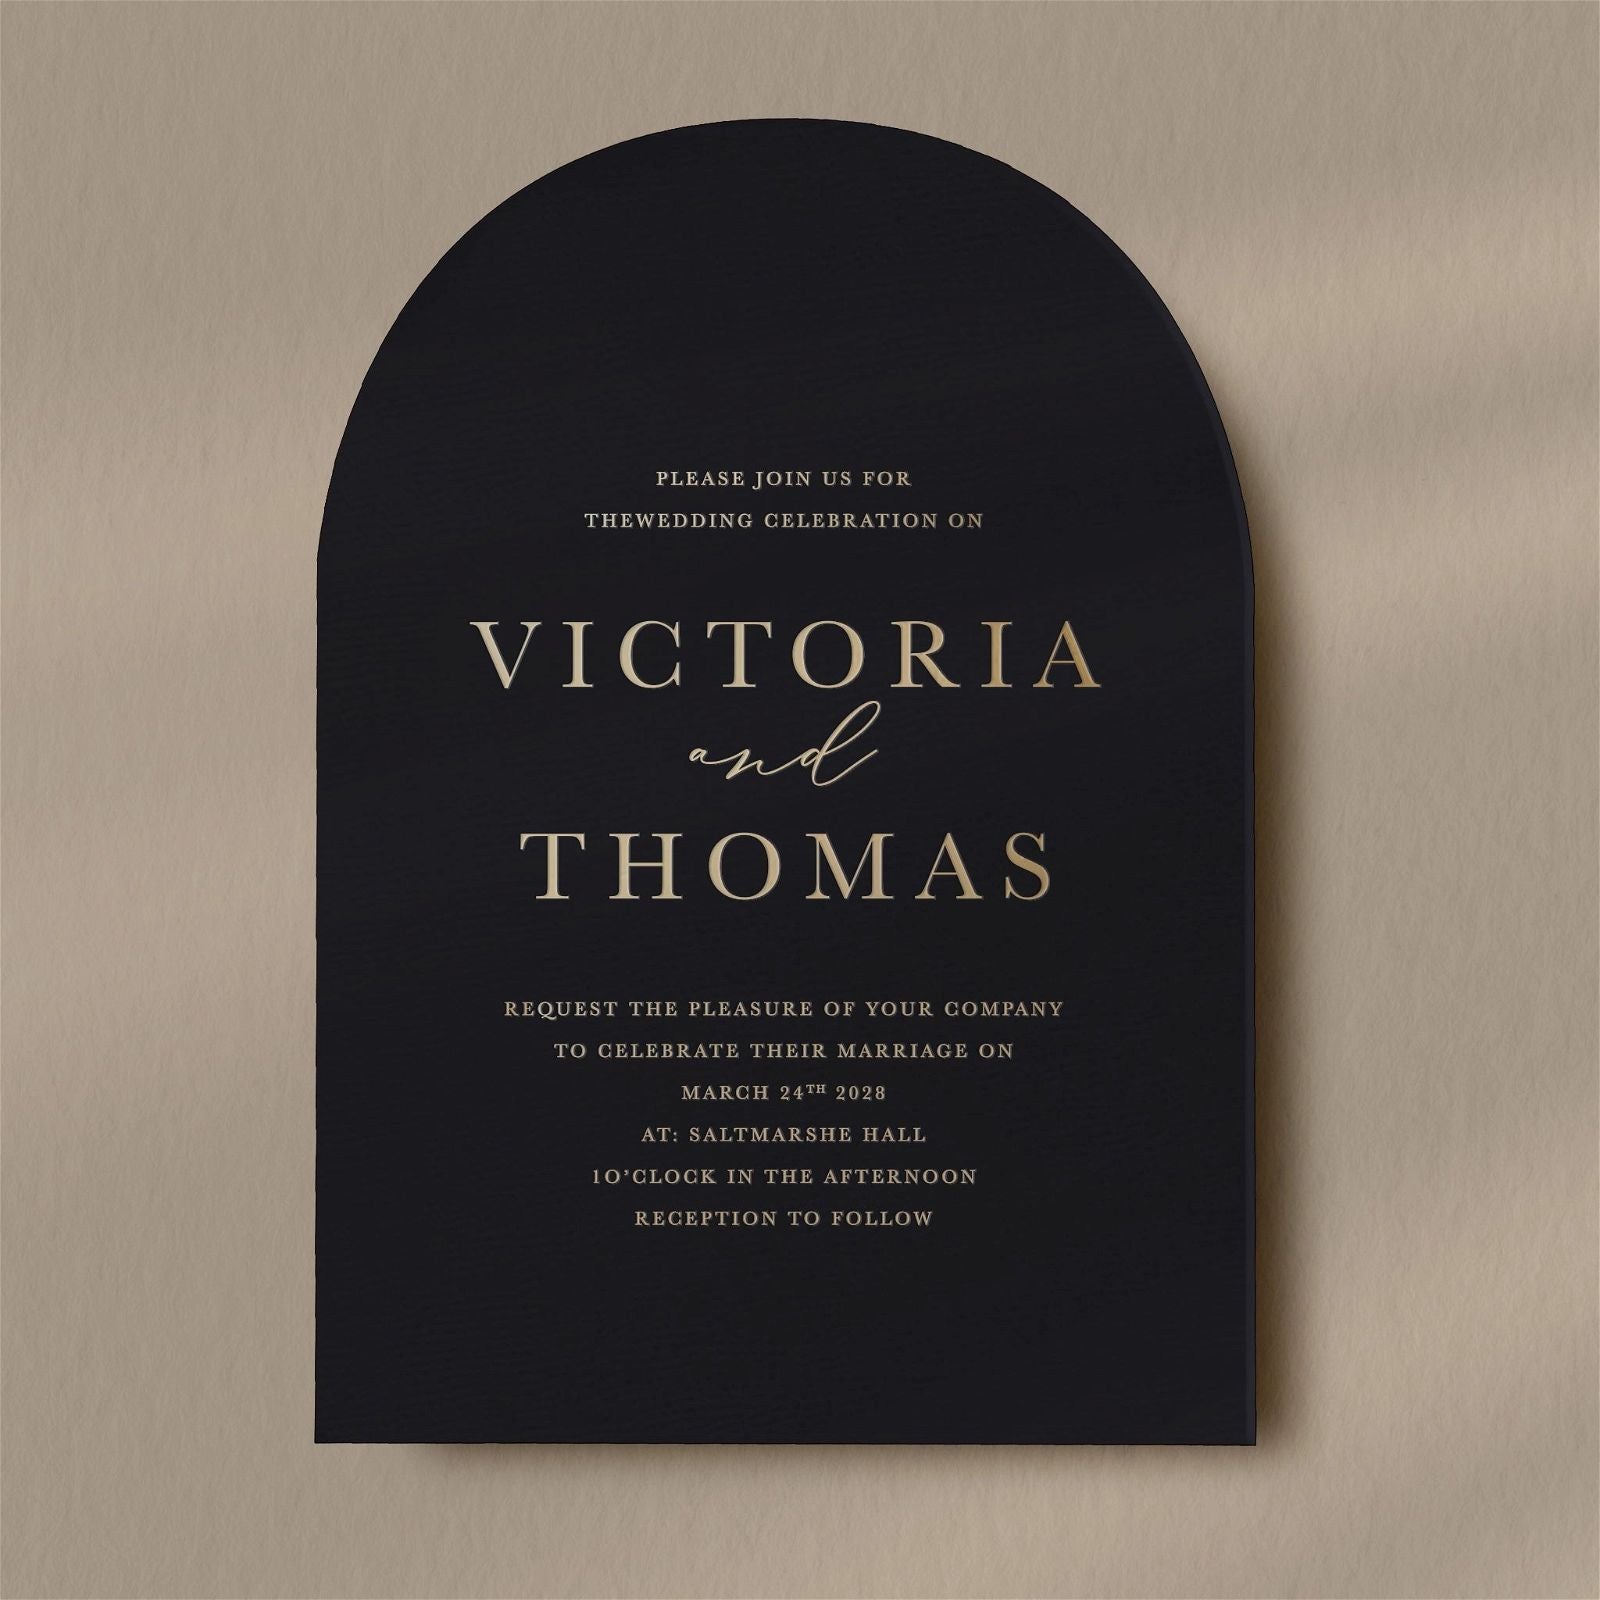 Victoria | Formal Wedding Invitations  Ivy and Gold Wedding Stationery   